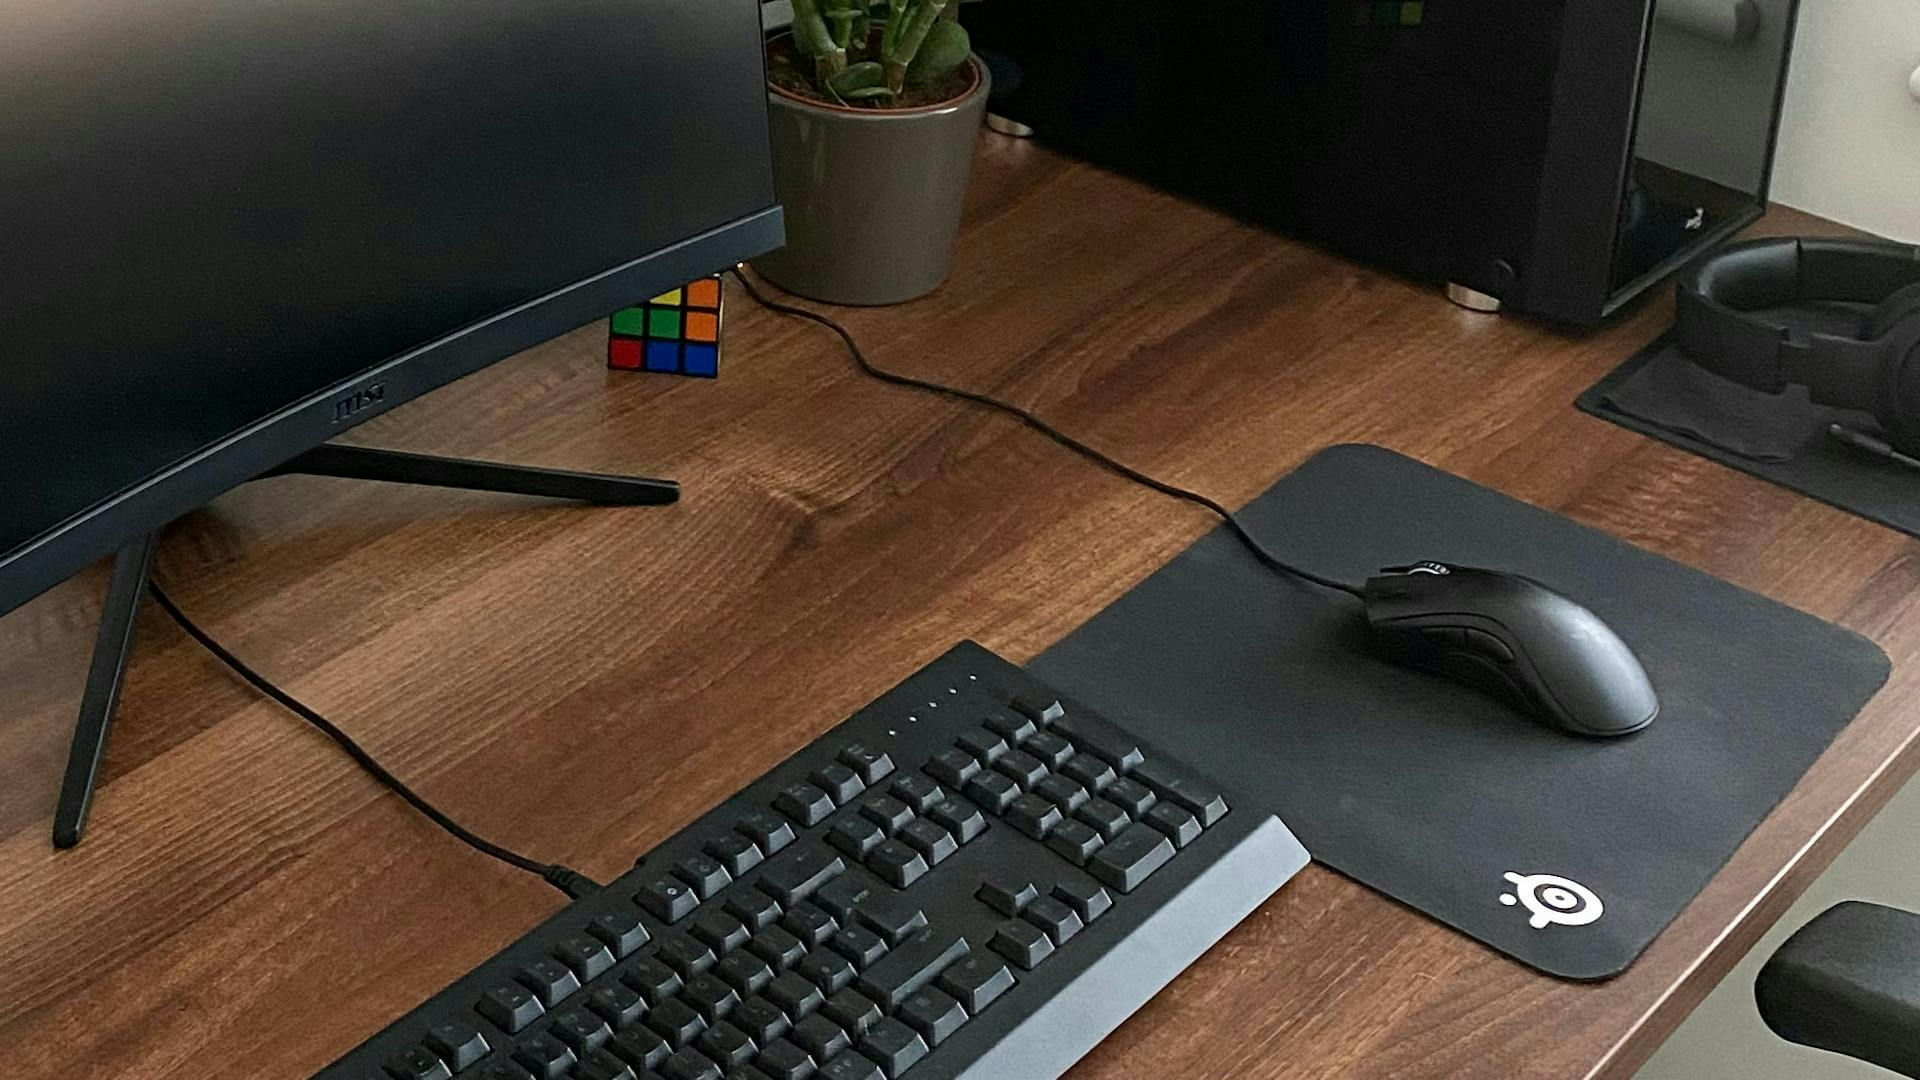 Small gaming mouse pad on a desktop